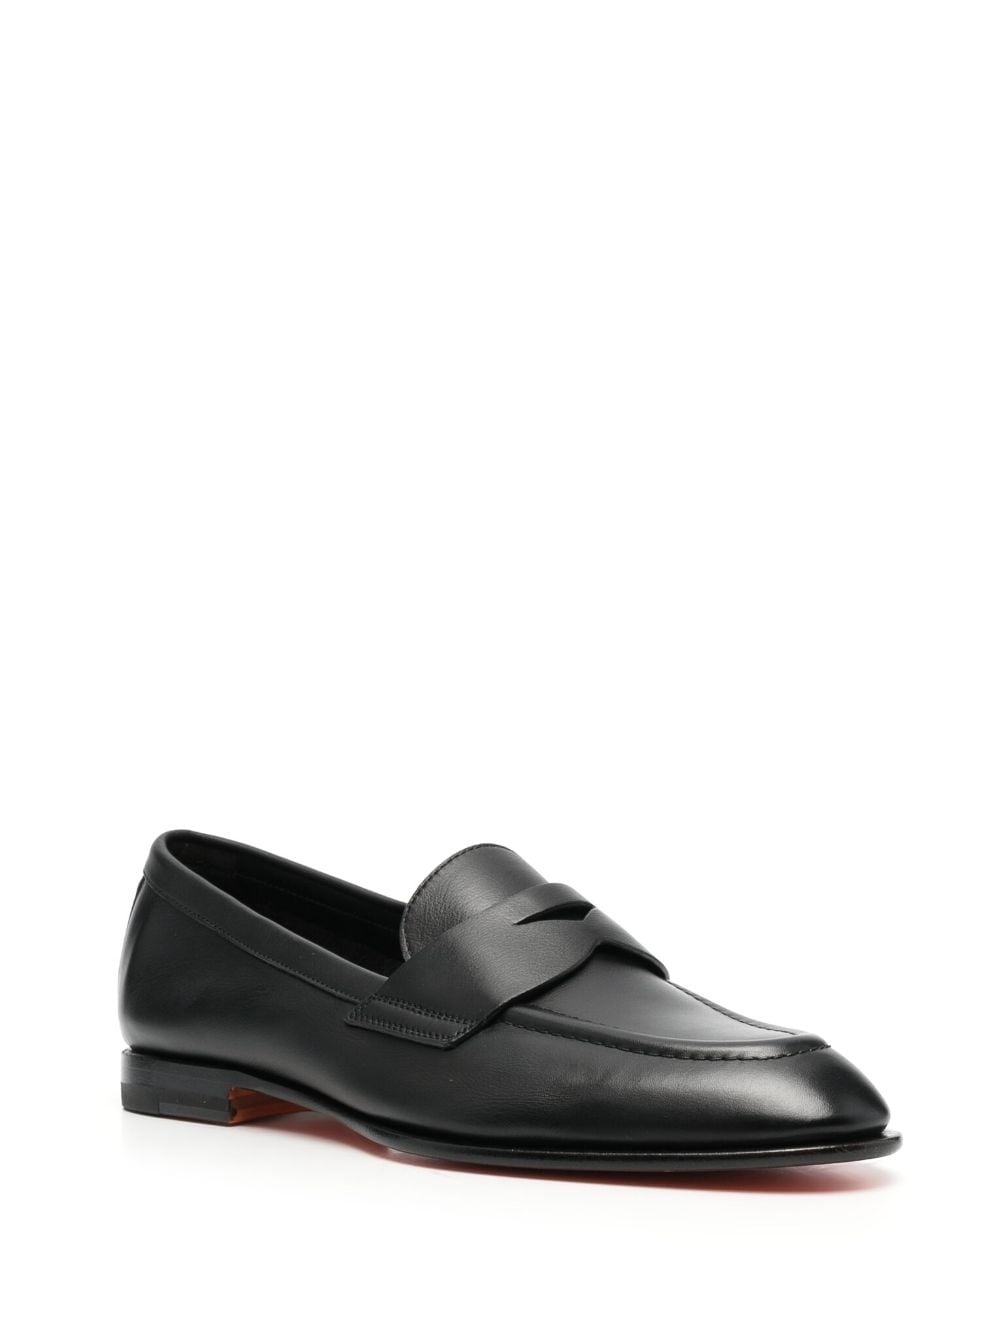 leather penny loafers - 2